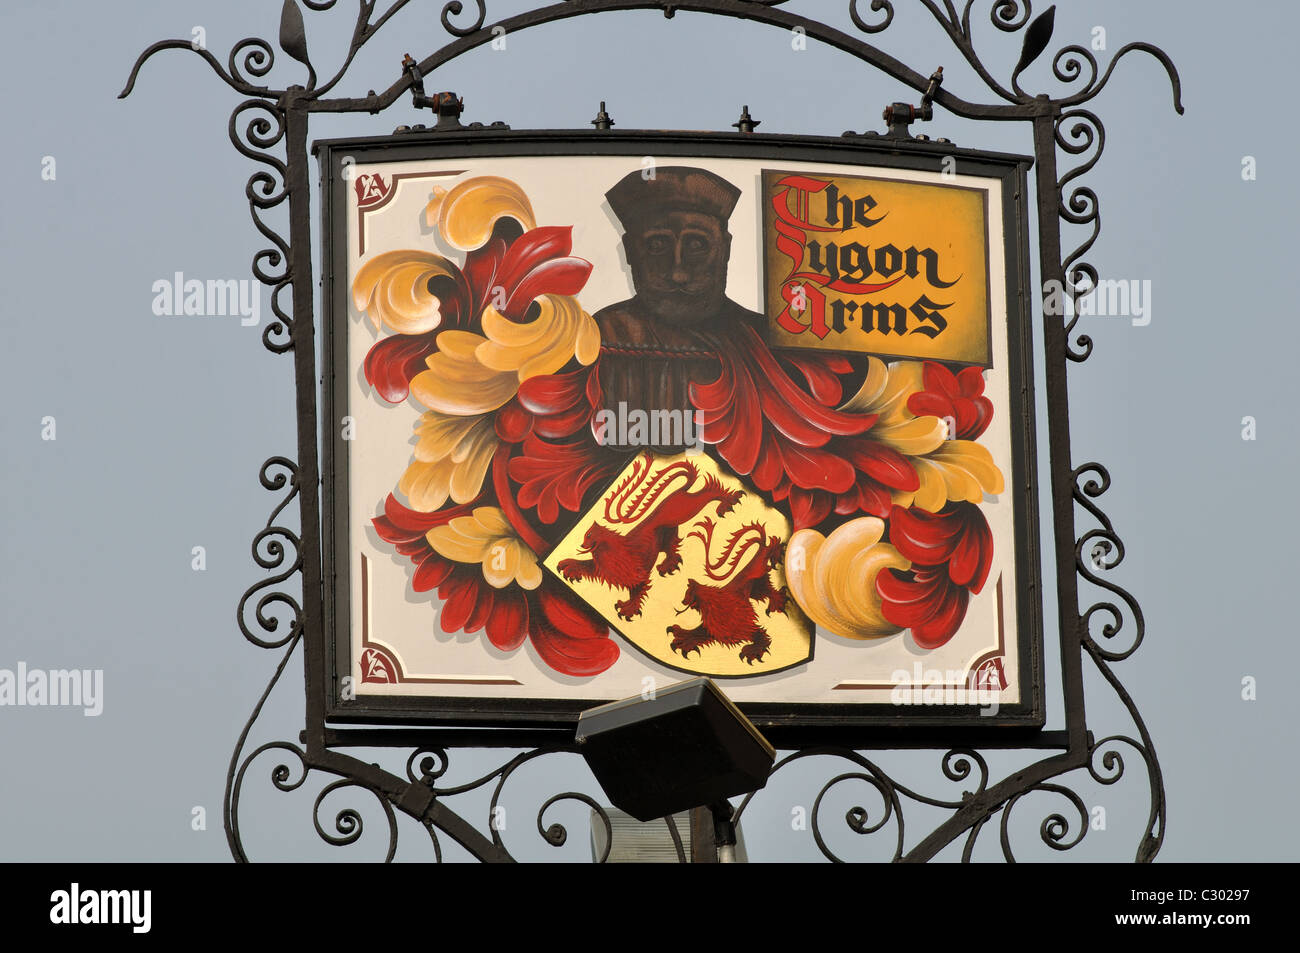 The Lygon Arms hotel sign, Broadway, Worcestershire, England, UK Stock Photo